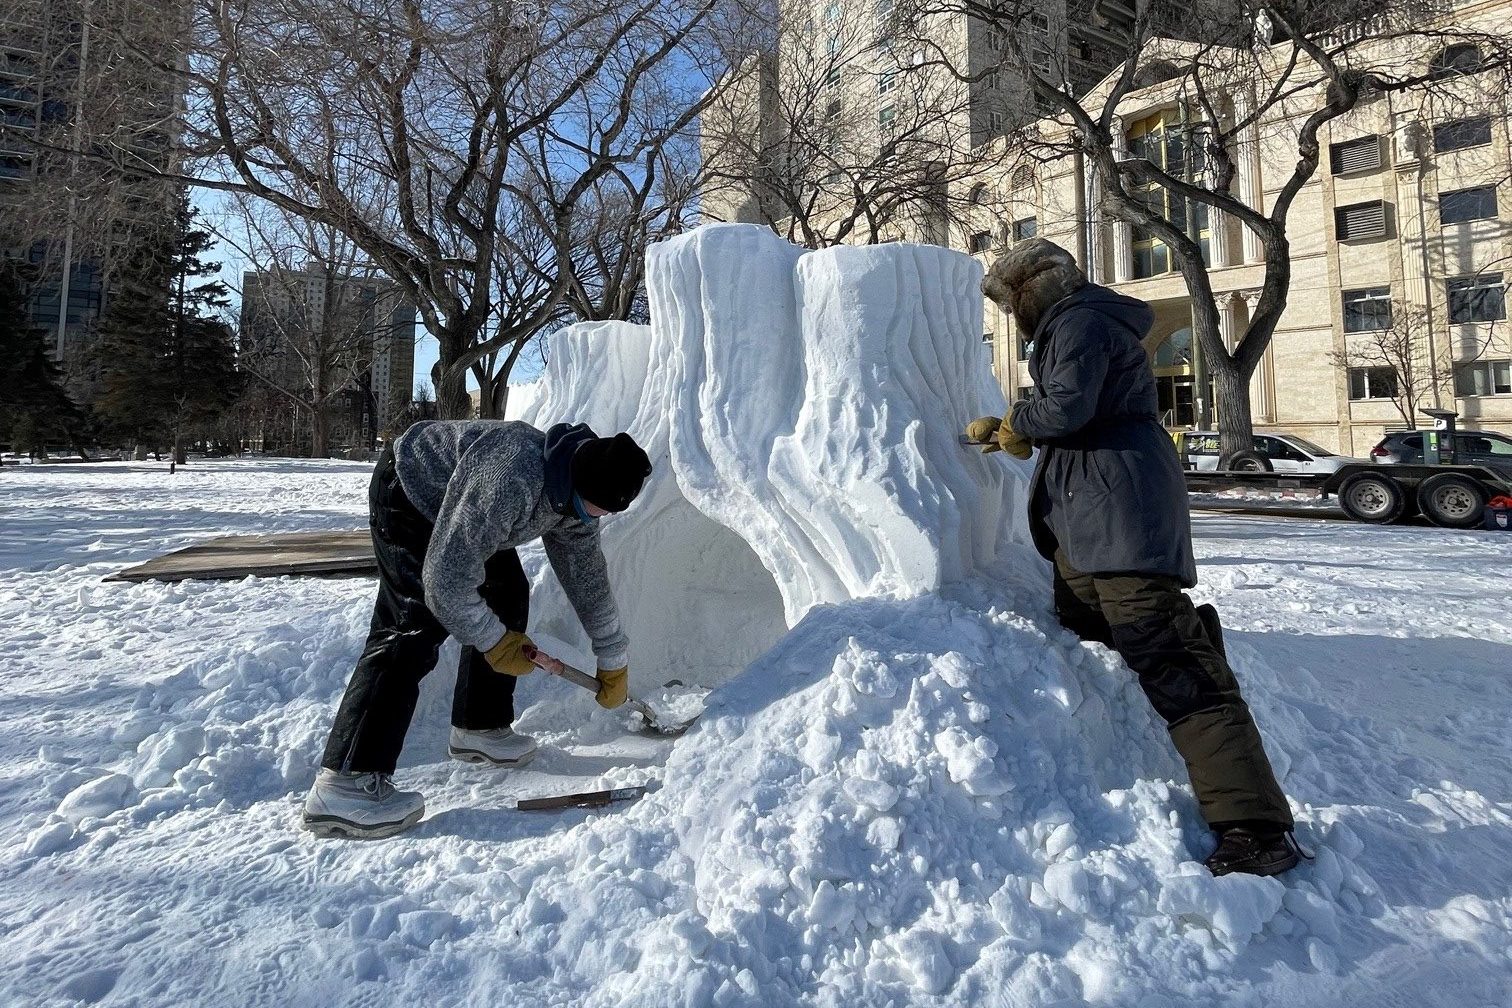 Downtown “SNOWFAS” carved by local artists show Winnipeggers there’s snow place like home